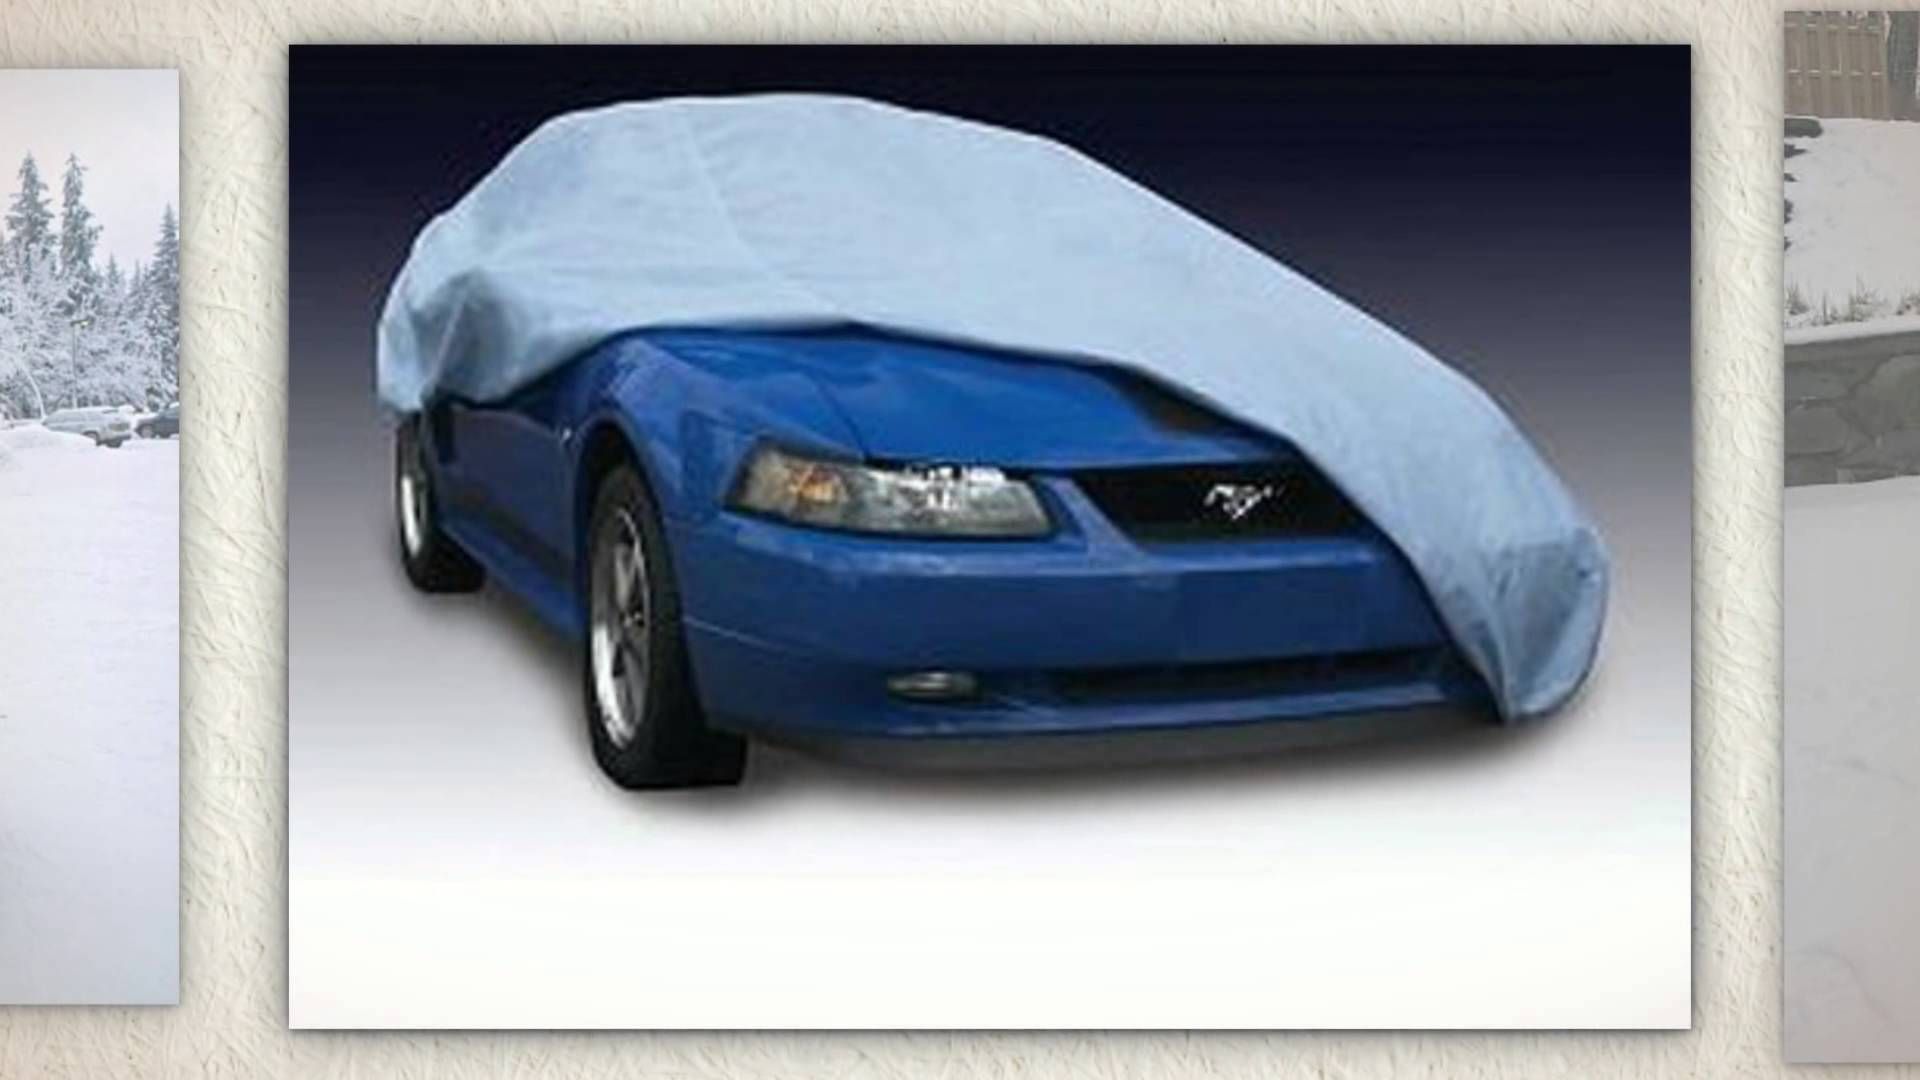 Car Cover For Snow - CARCROT